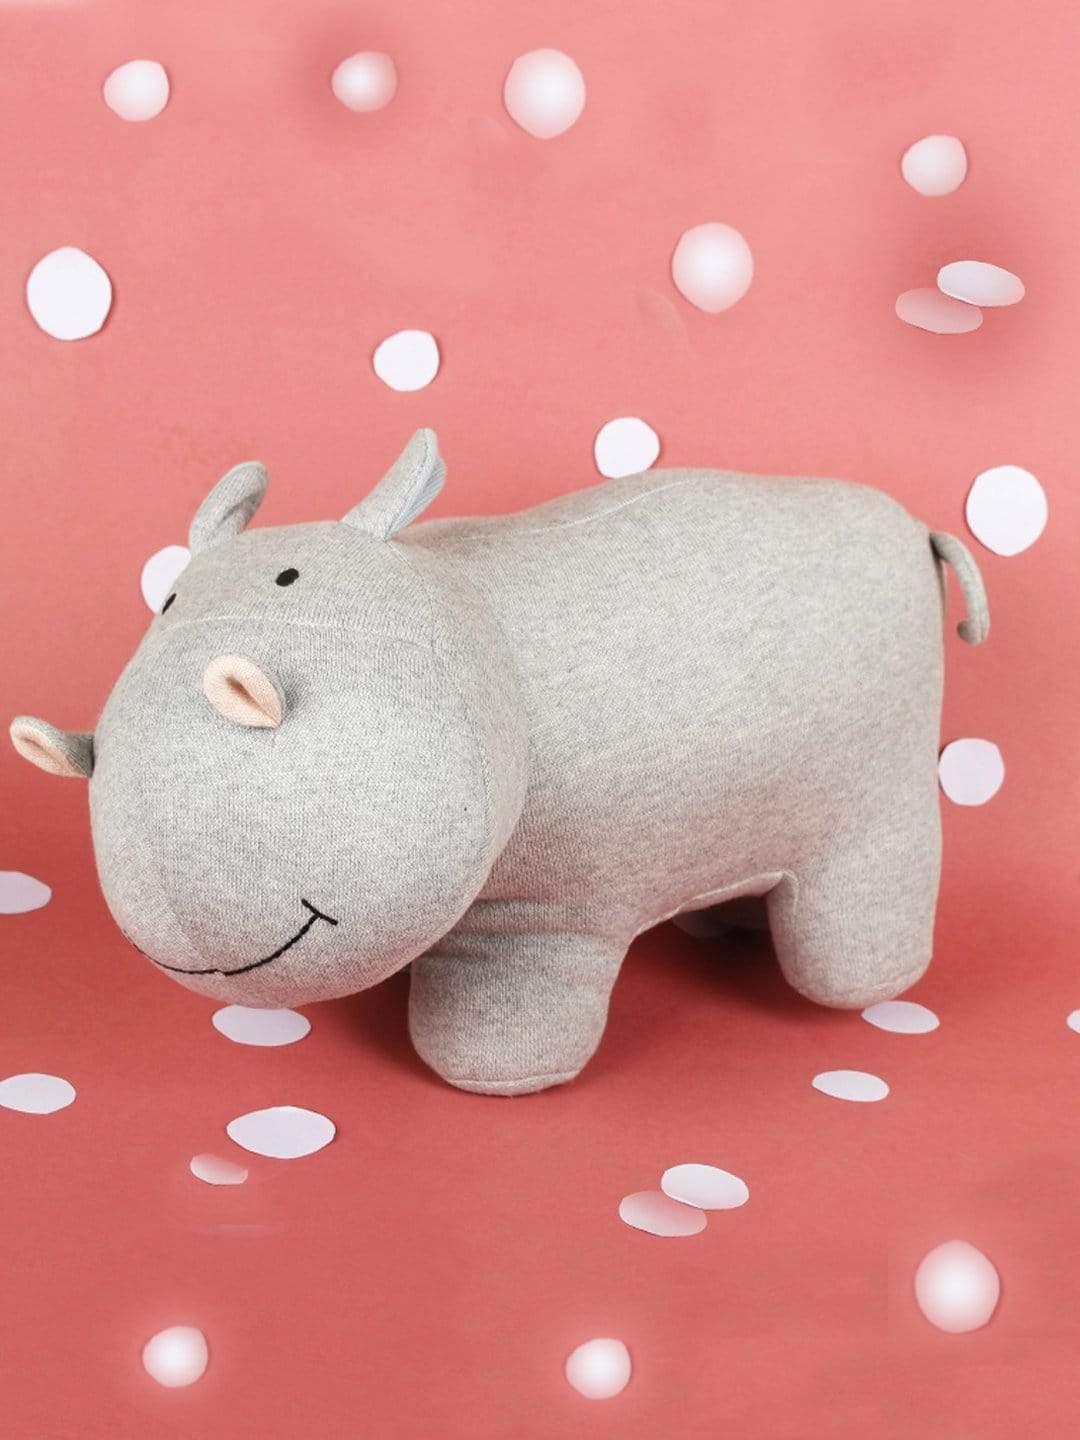 Mr. Hippo Knitted Cotton Shaped Cushion - The Wishing Chair